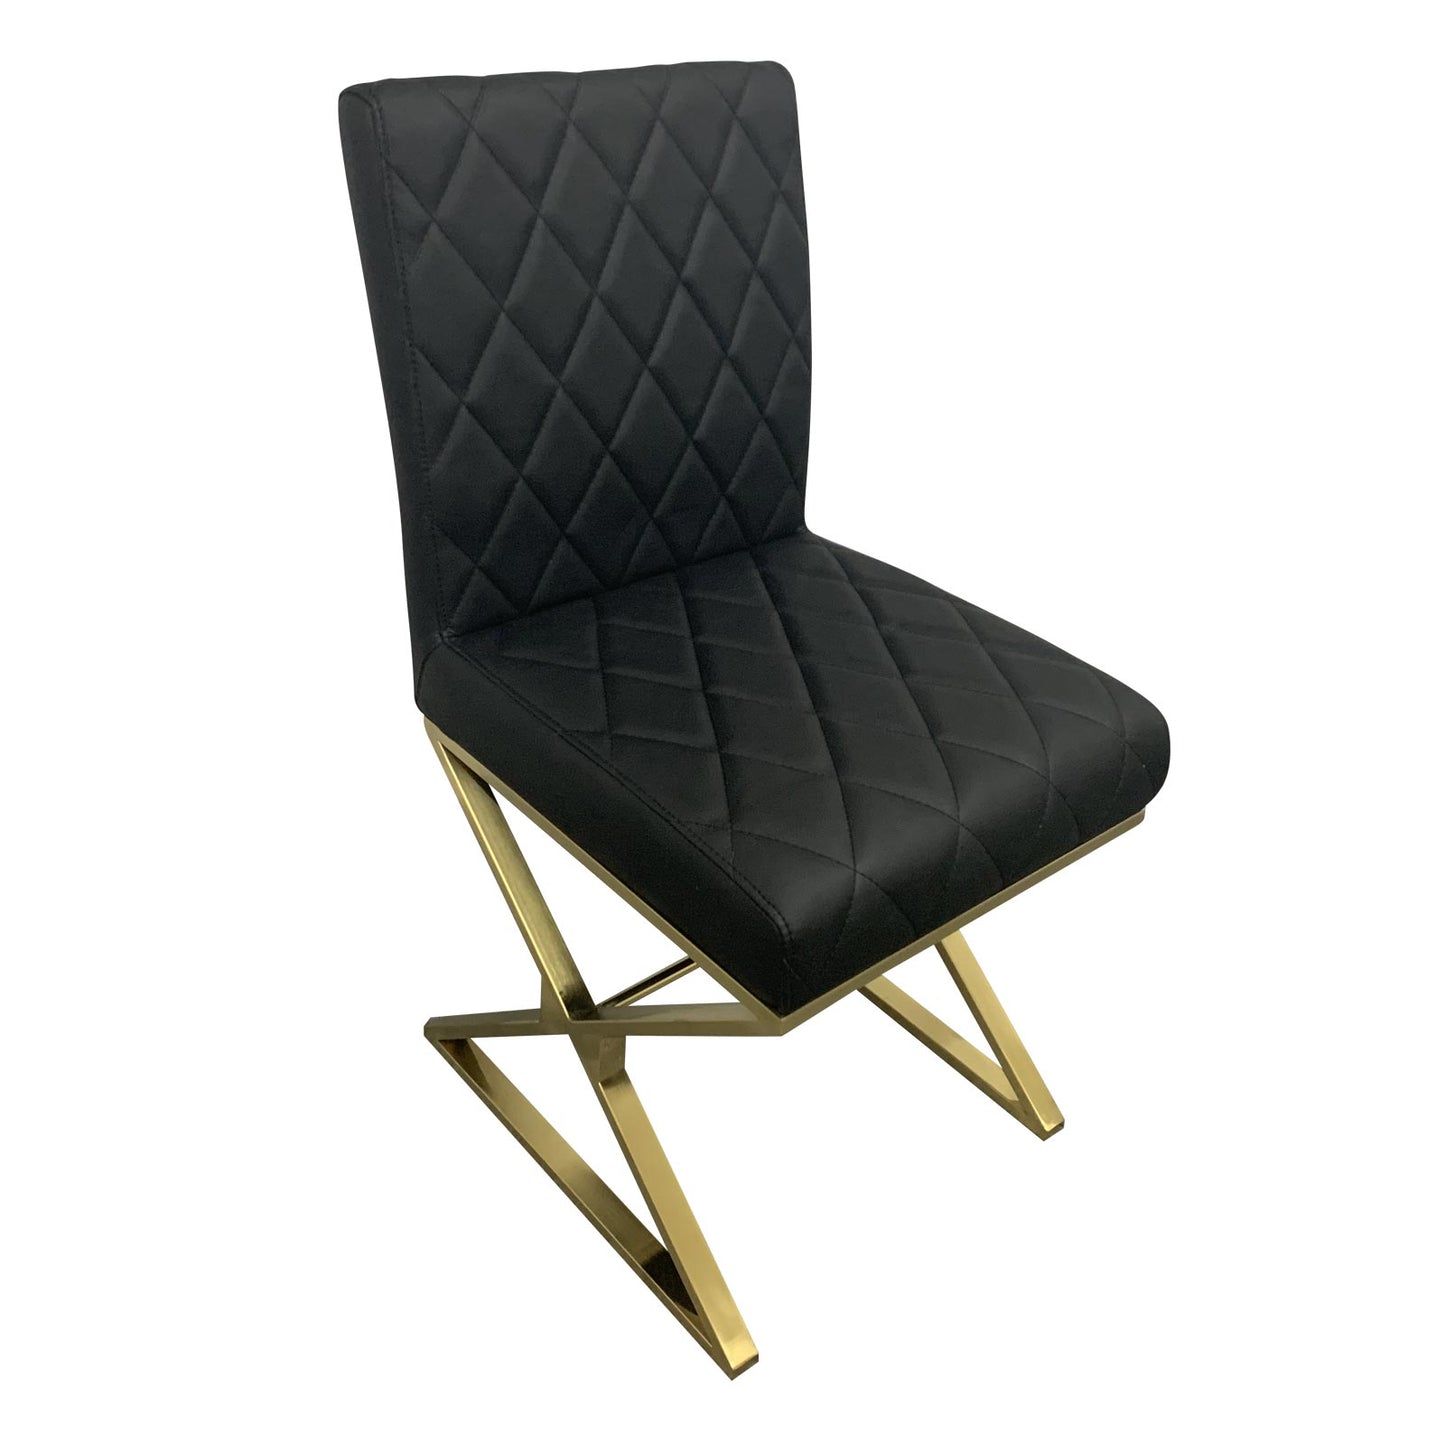 2X Dining Chair Stainless Gold Frame & Seat Black PU Leather - image3